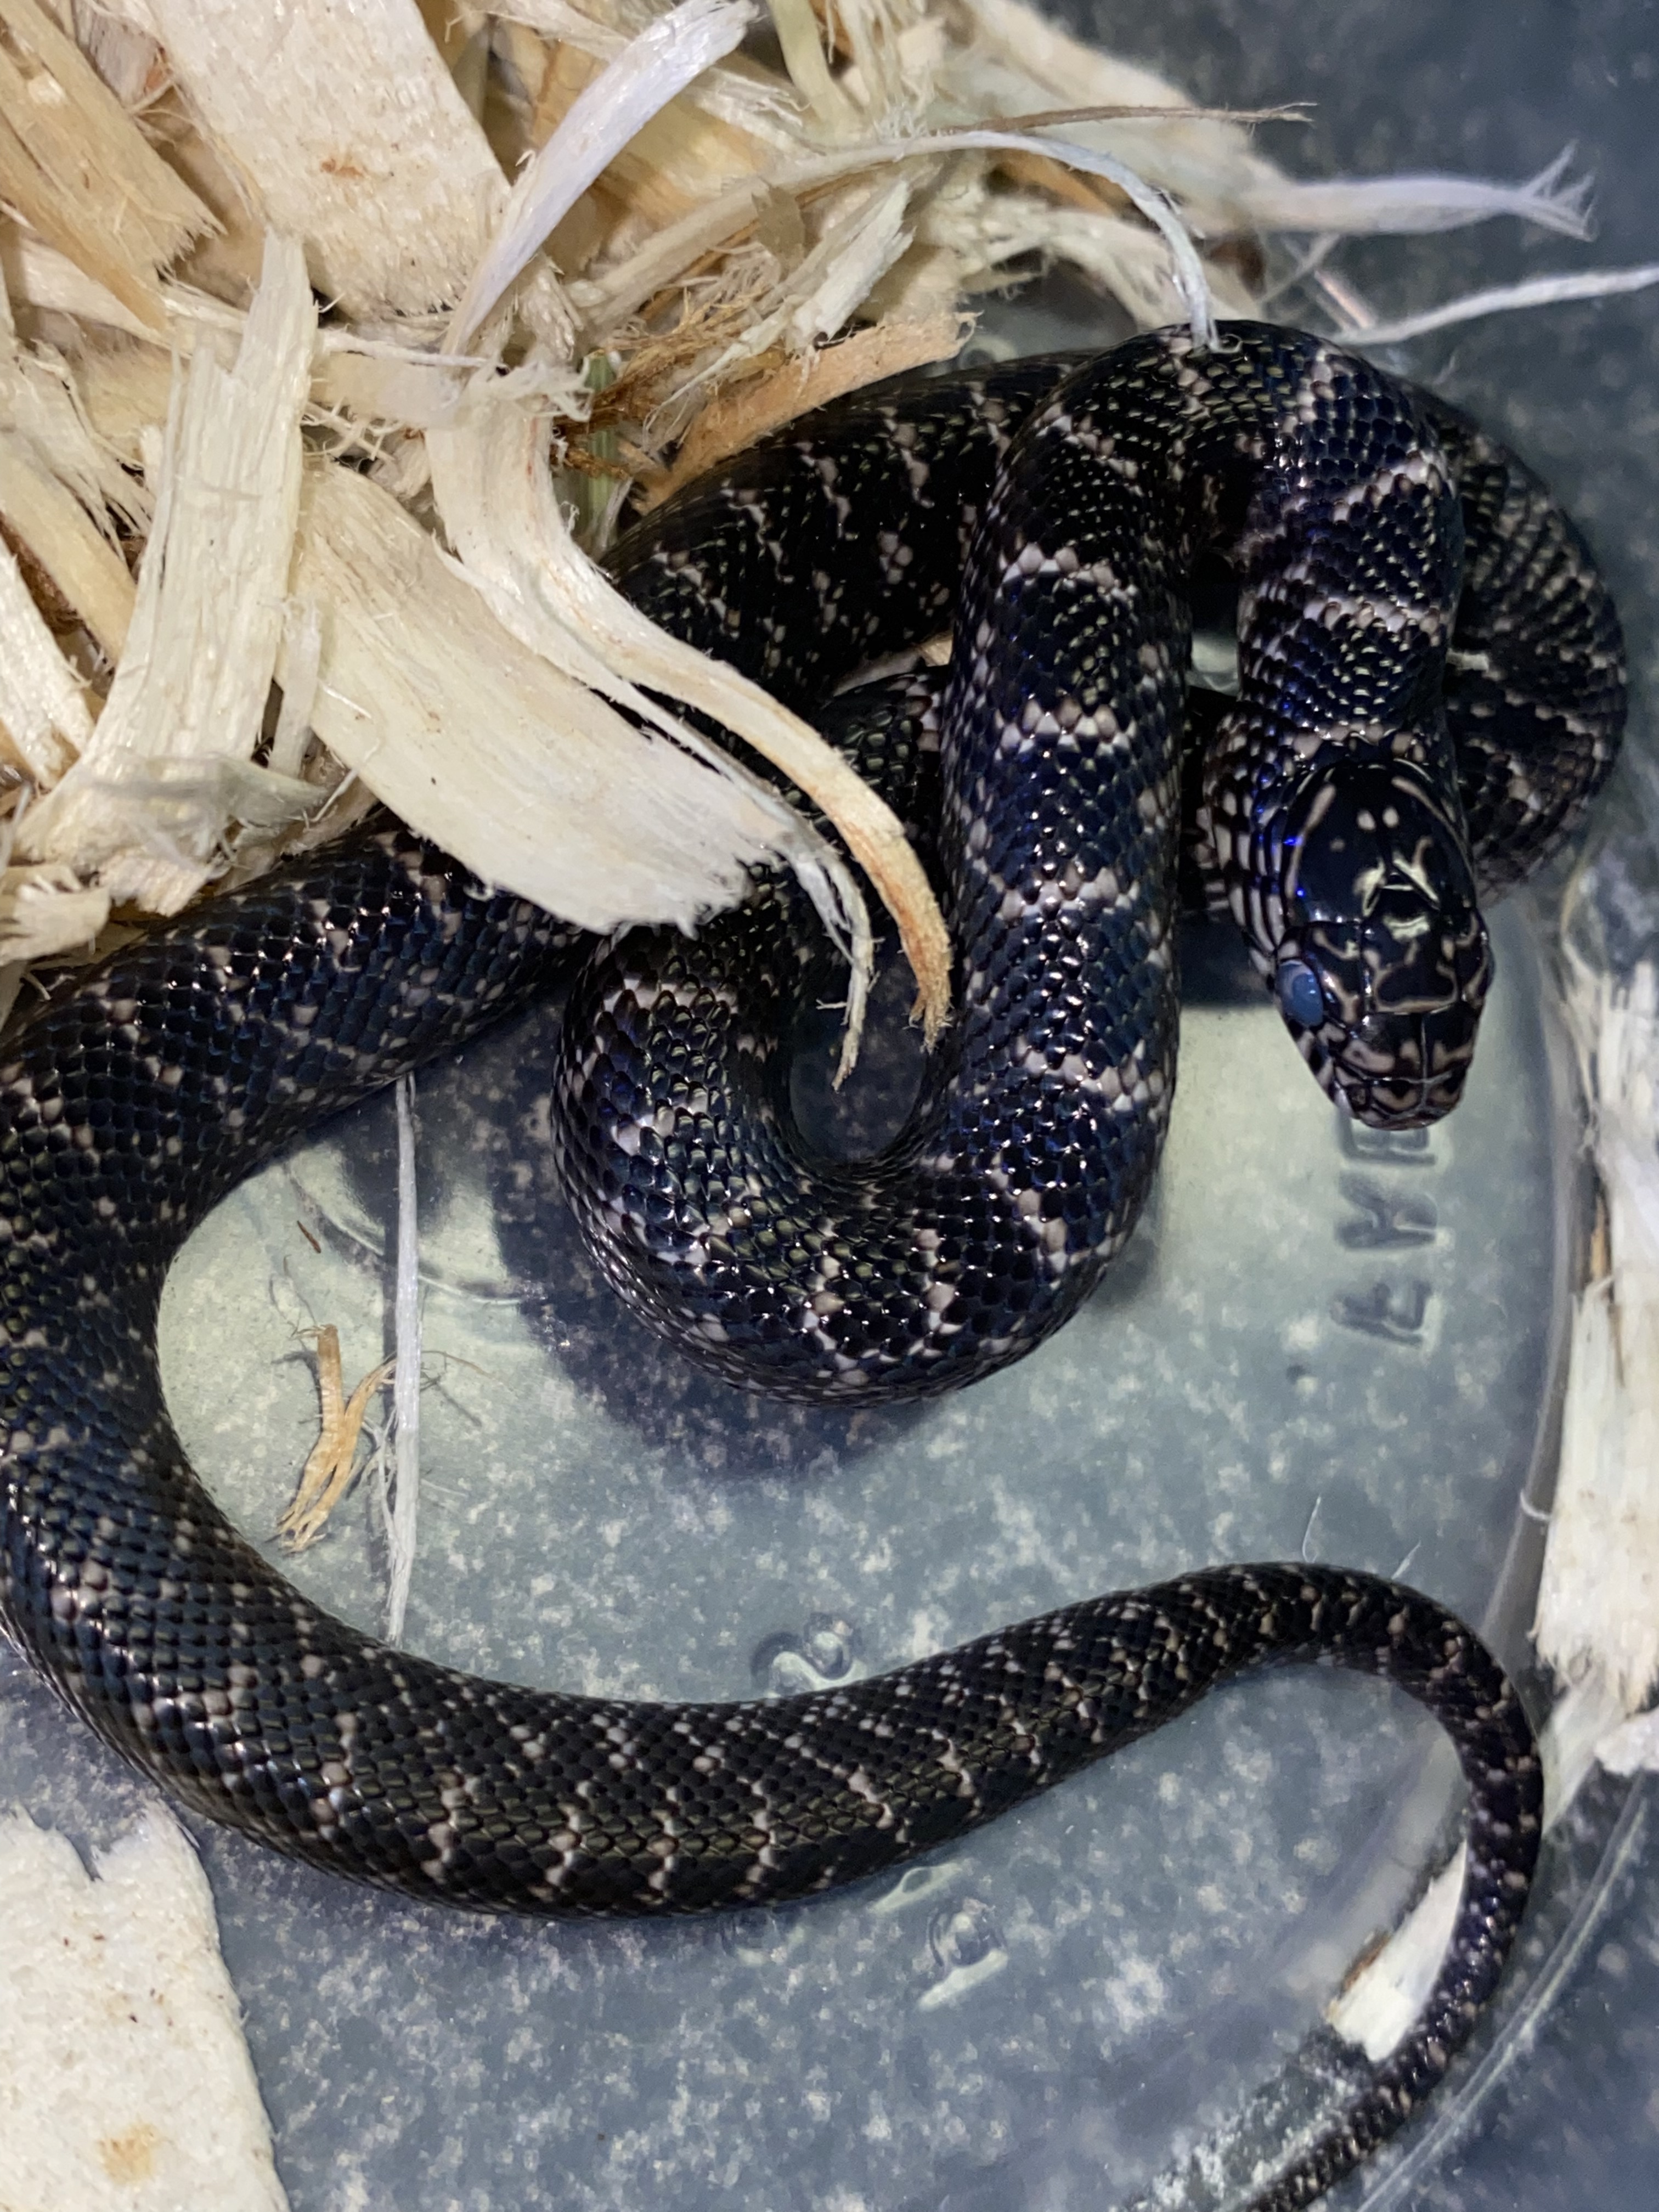 Axanthic Florida Kingsnake by Major league exotic pets